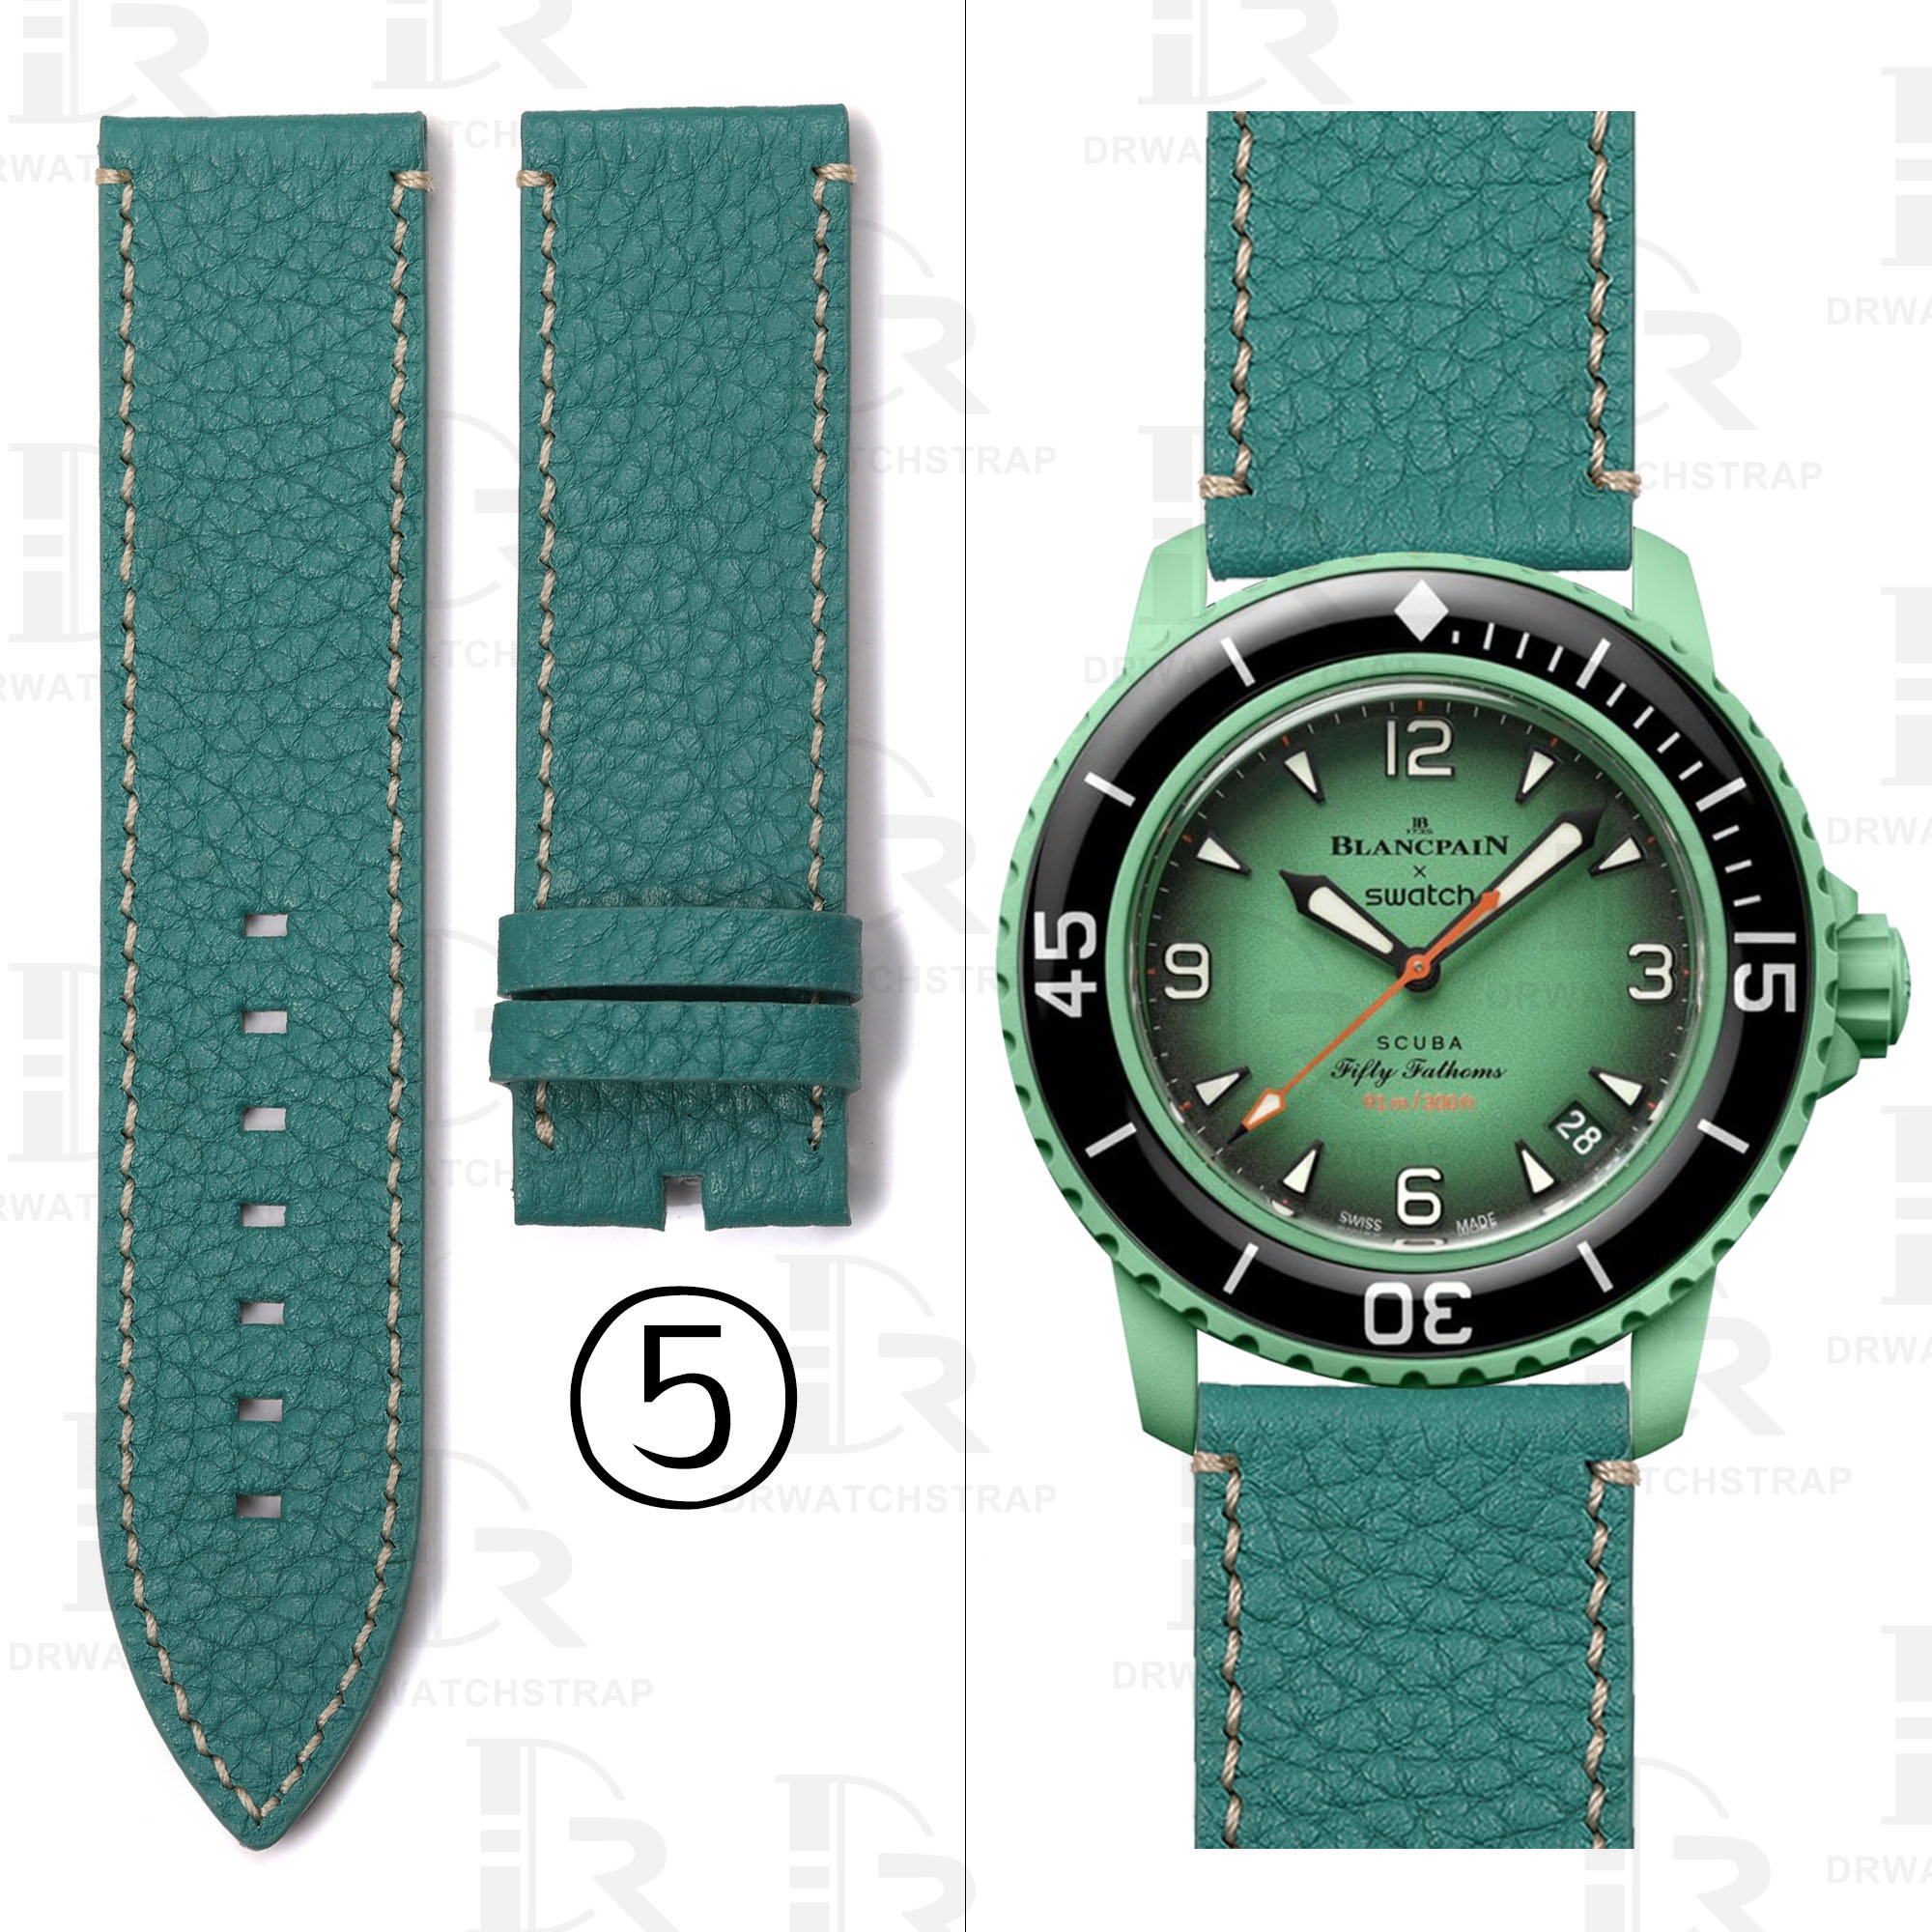 Buy Custom Blancpain x Swatch leather strap 22mm Green Calfskin leather watch band